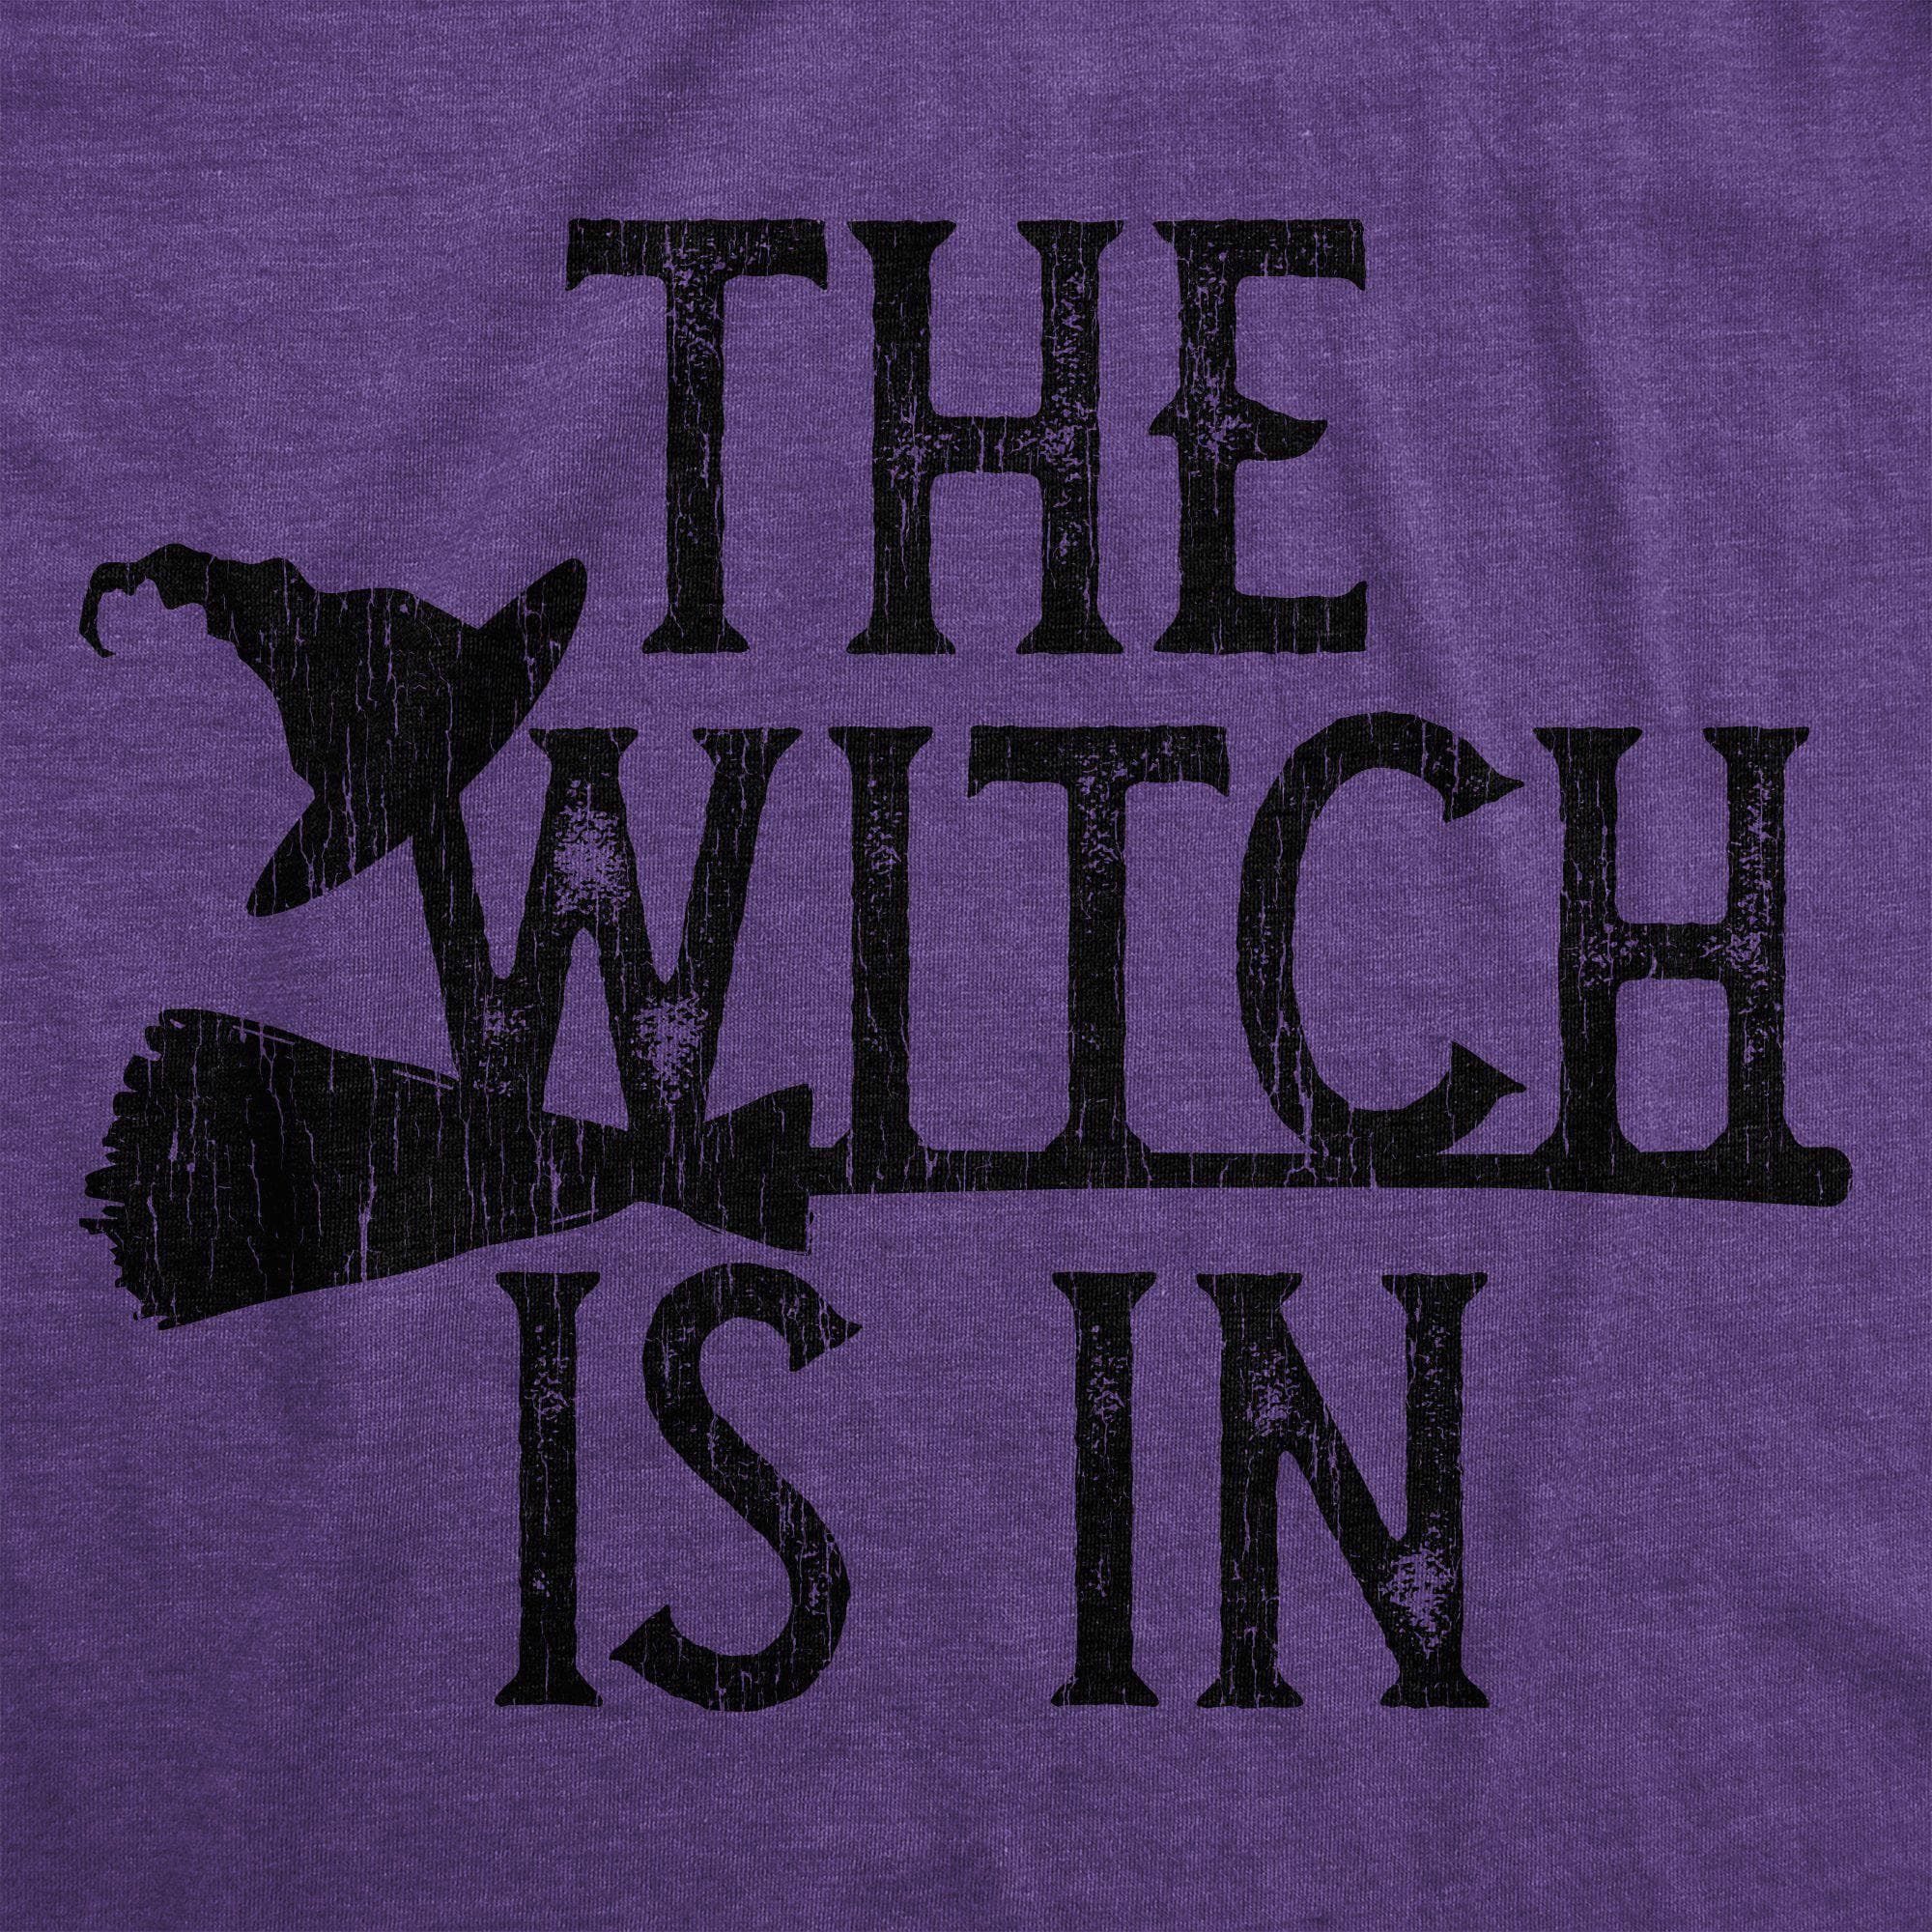 The Witch Is In Broomstick Women's Tshirt - Crazy Dog T-Shirts